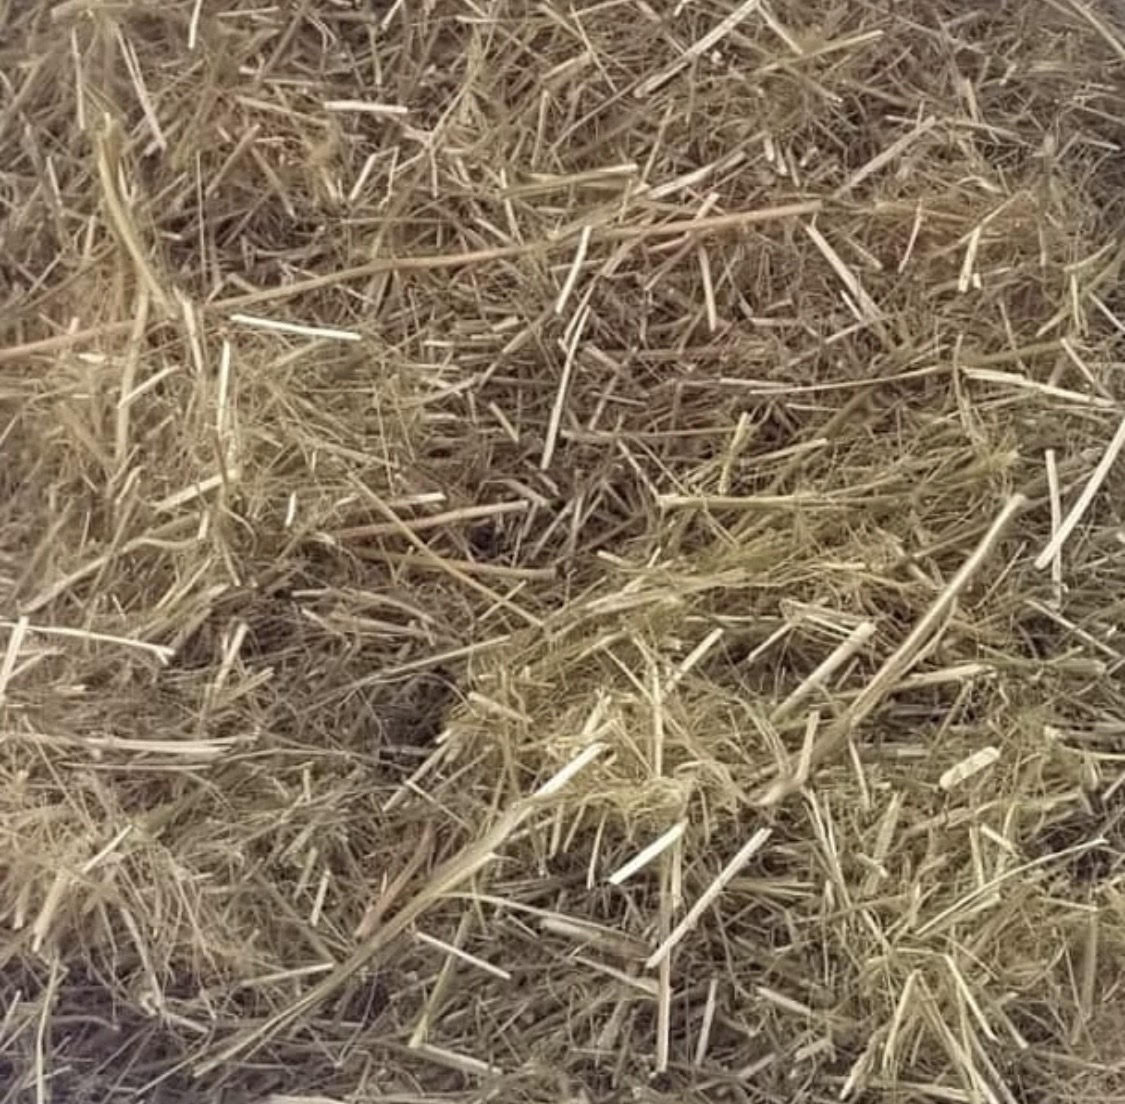 Stems Removed from Threshed Hemp Plants